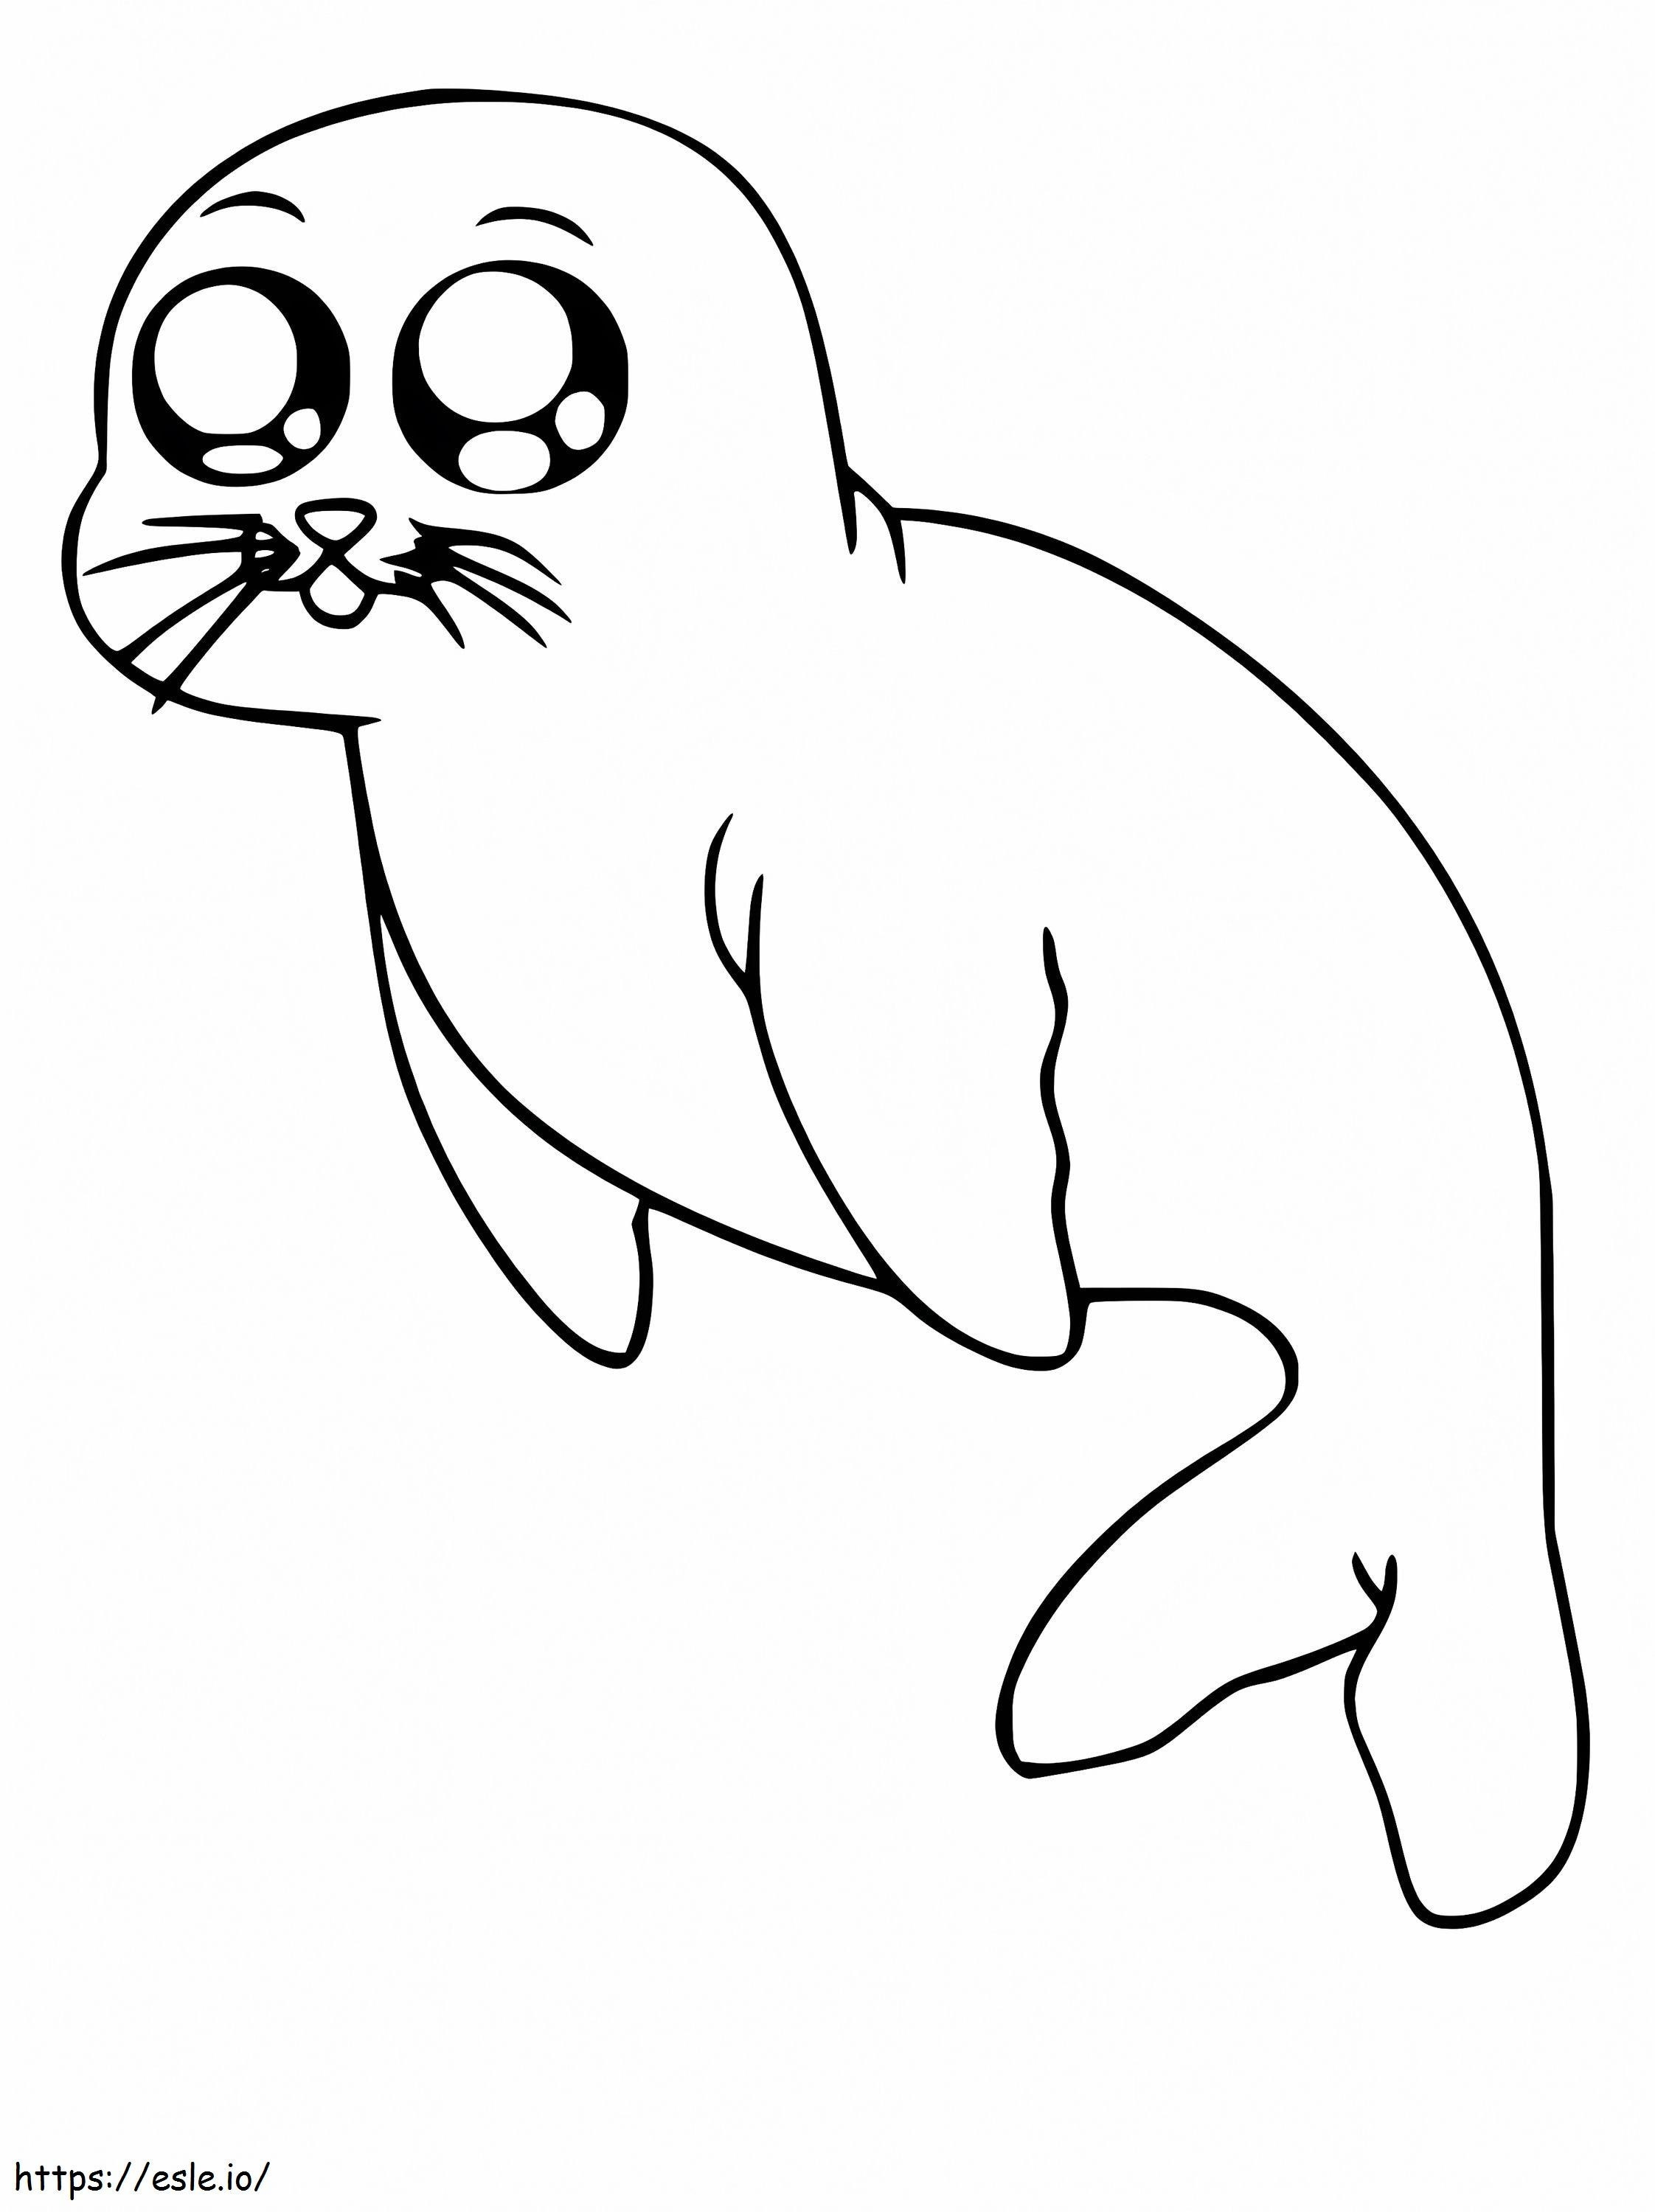 Seal With Cute Eyes coloring page